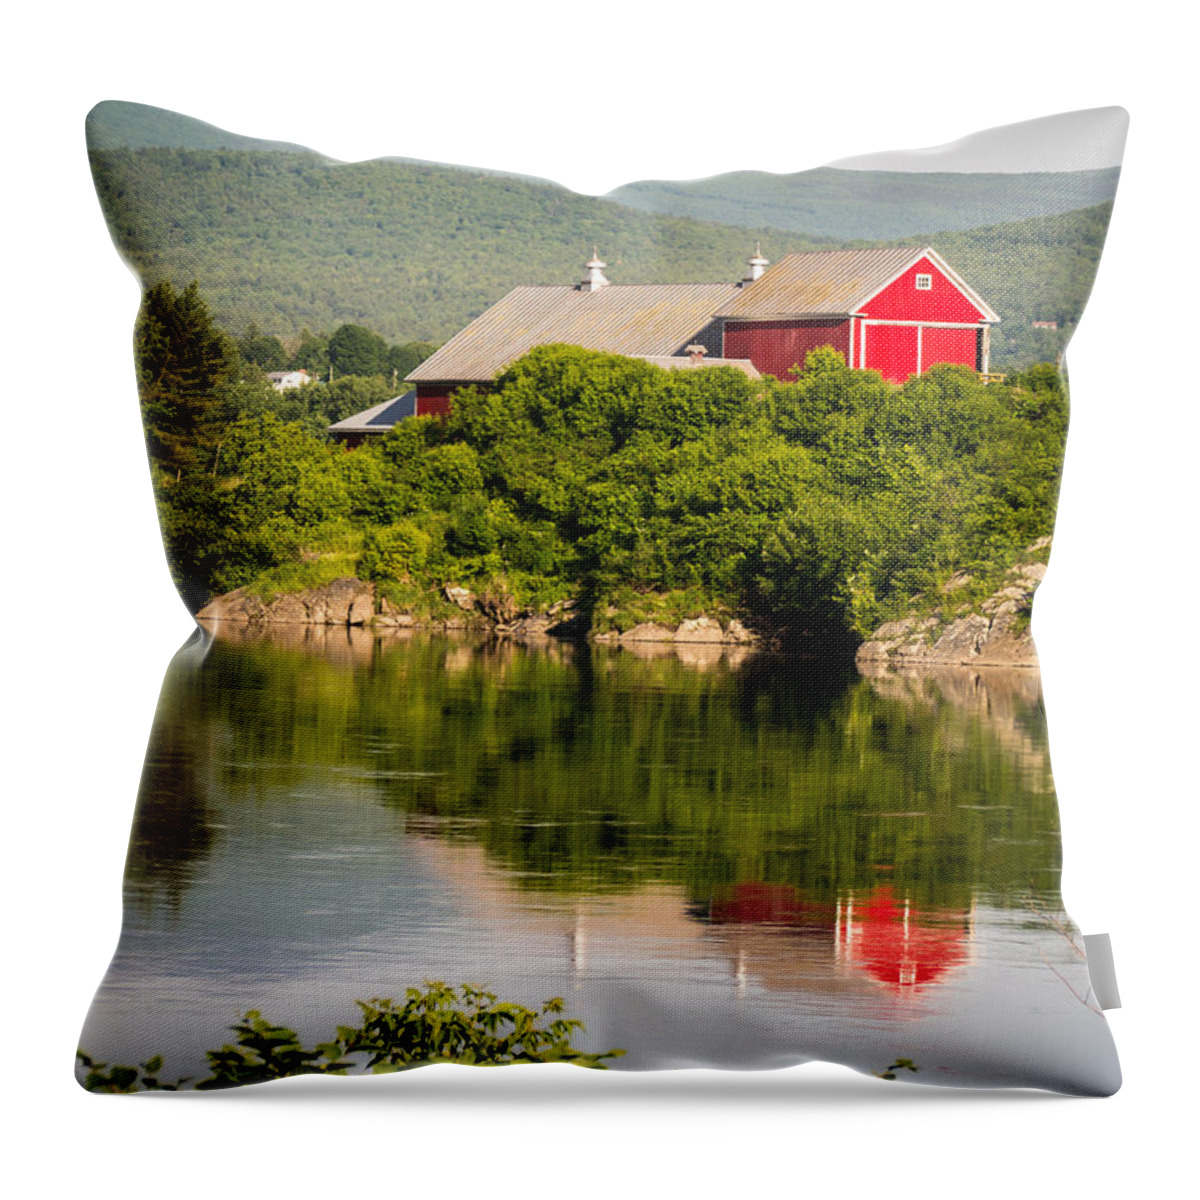 Collection Throw Pillow featuring the photograph Connecticut River Farm by Edward Fielding